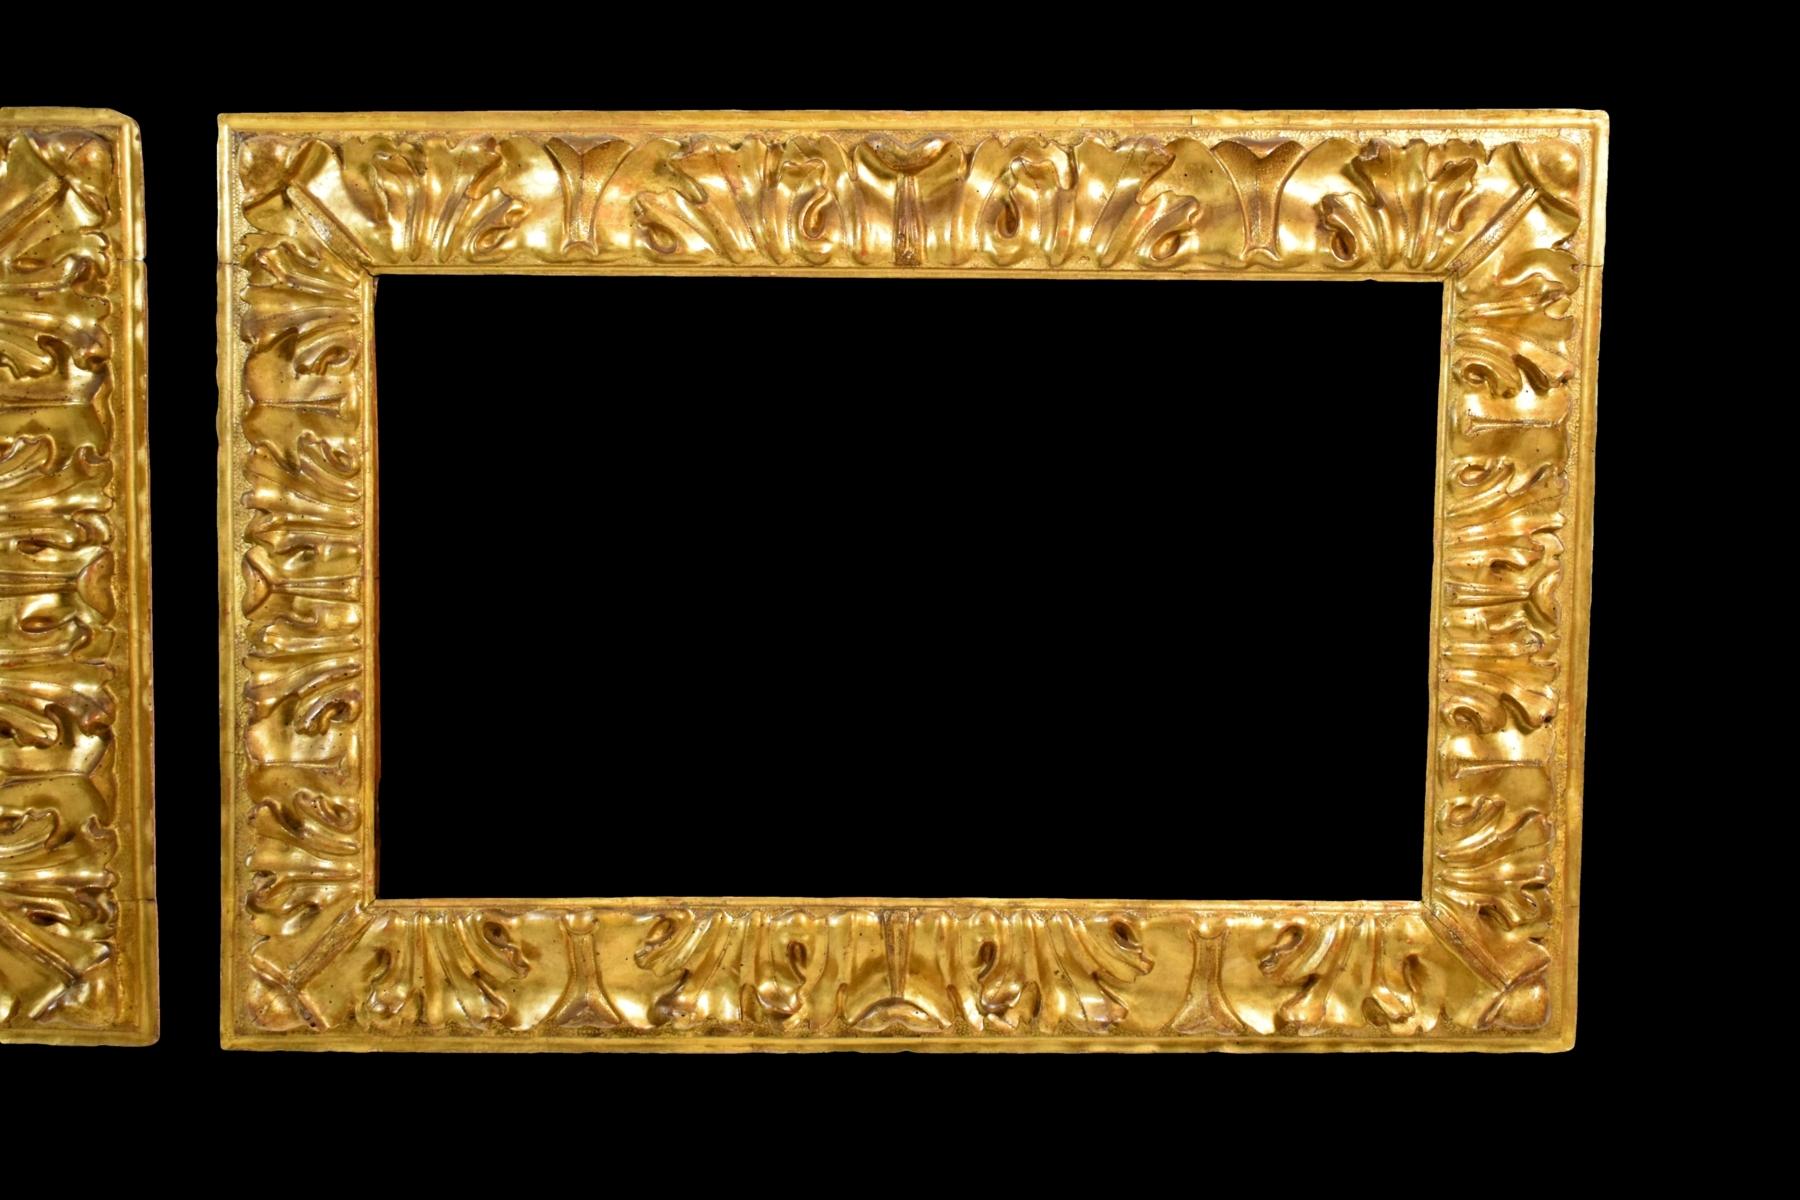 Baroque 17th Century, Pair of Italian Carved Giltwood Frames